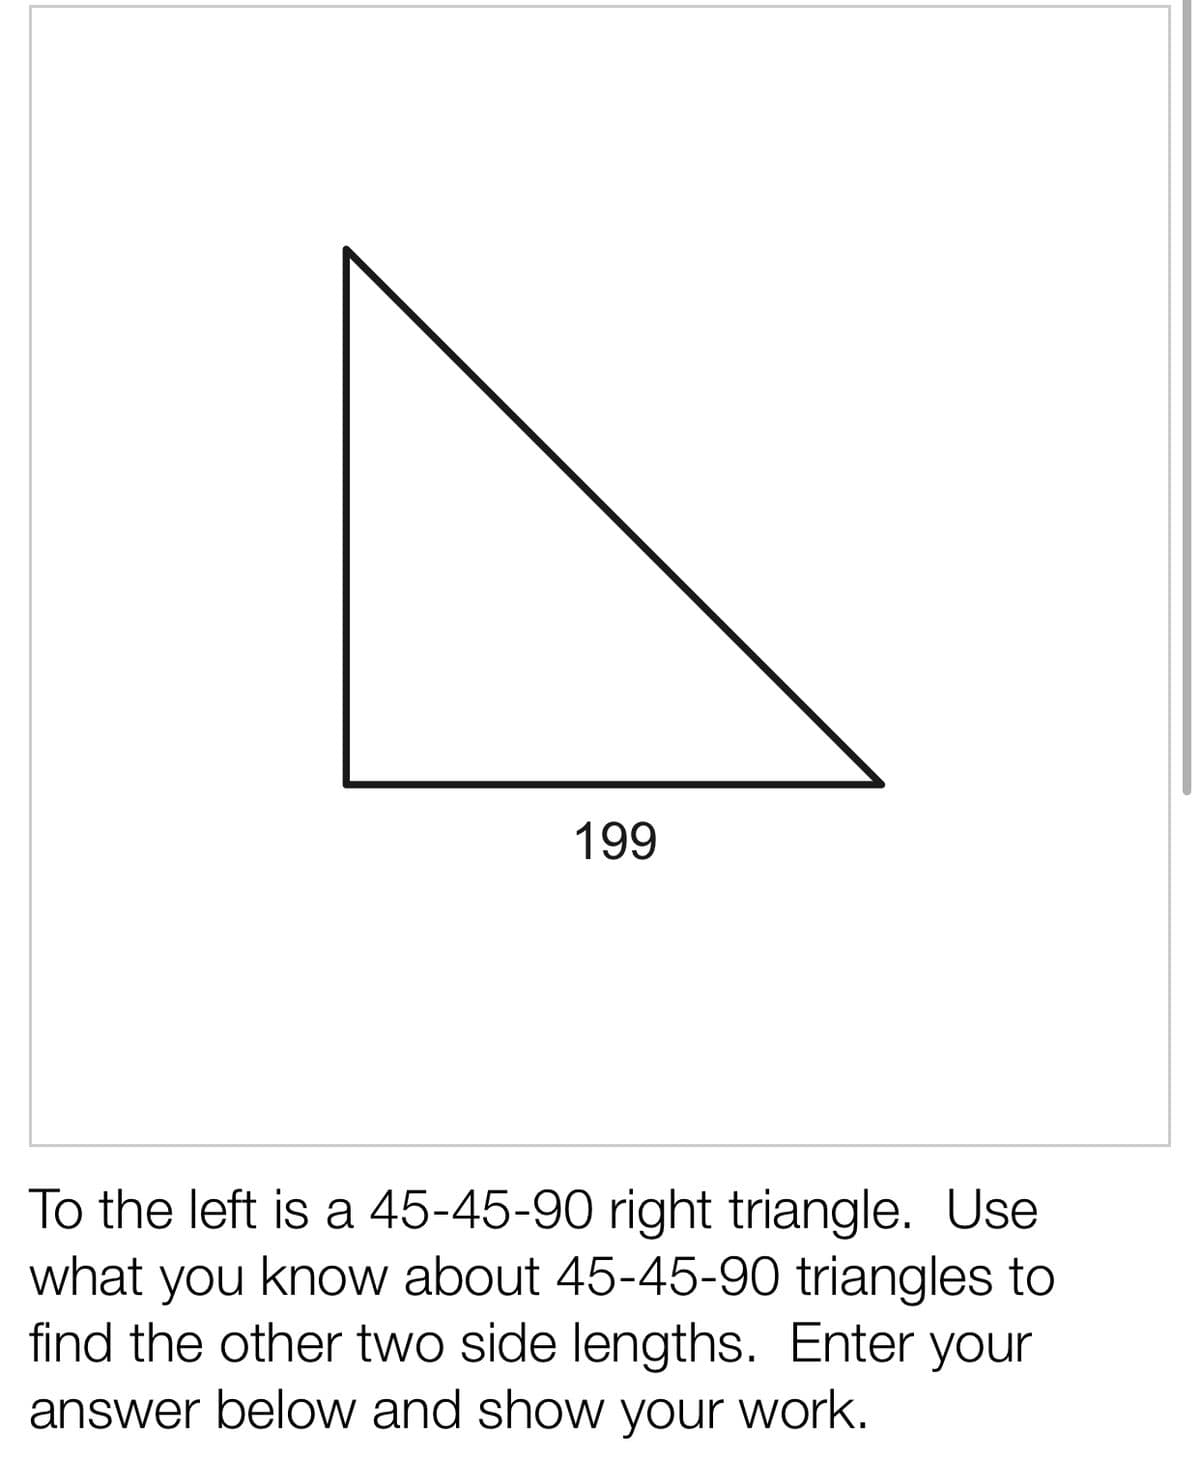 199
To the left is a 45-45-90 right triangle. Use
what you know about 45-45-90 triangles to
find the other two side lengths. Enter your
answer below and show your work.
